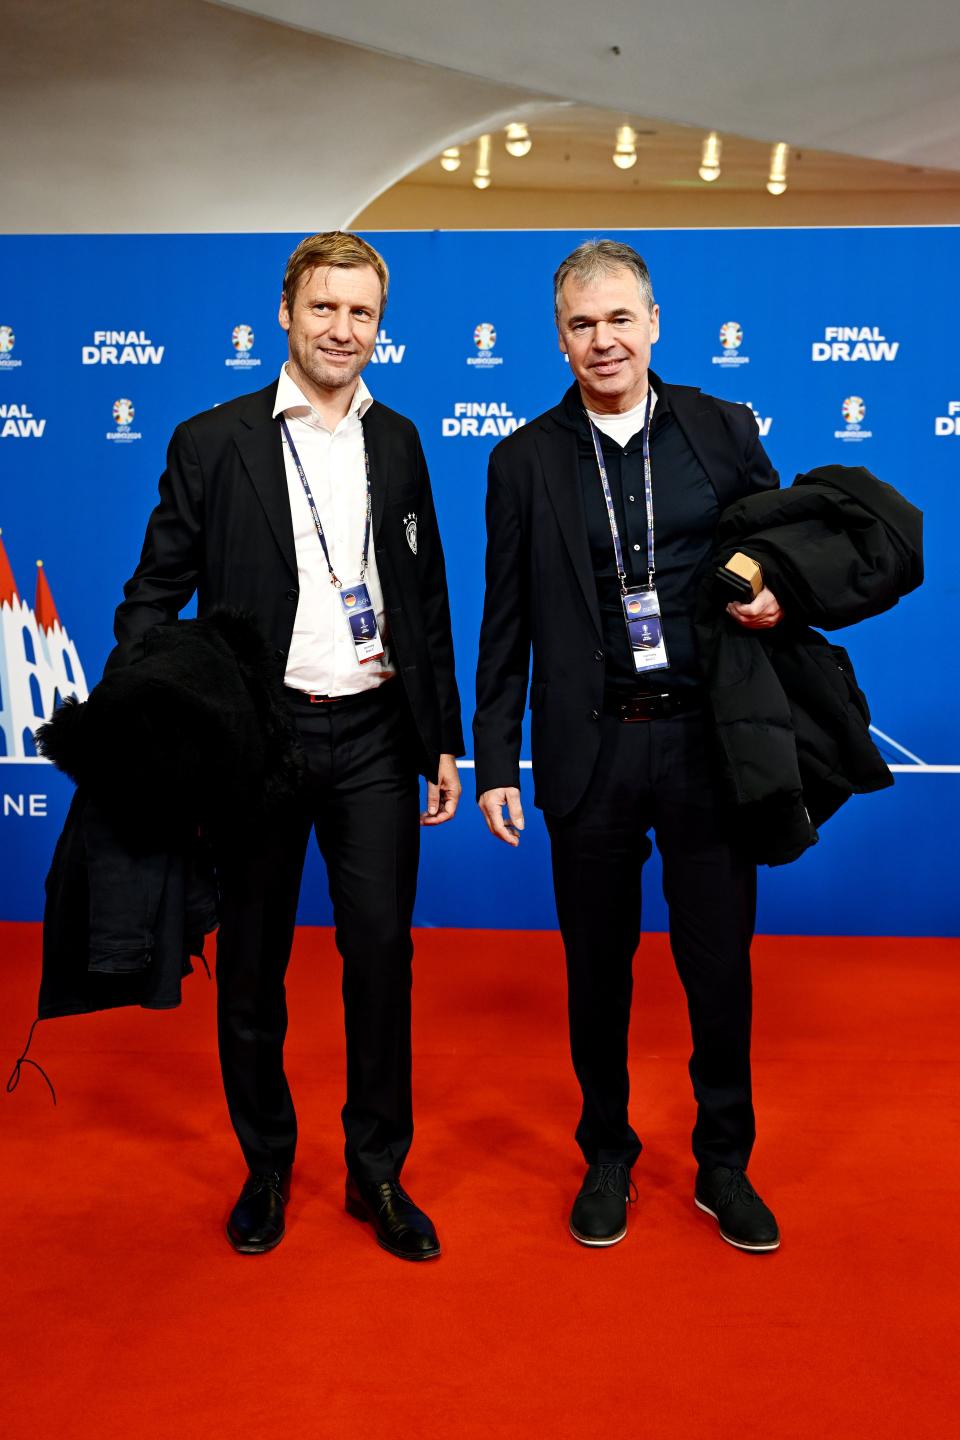 Dr. Holger Blask of the DFB and Andreas Rettig, DFL Chief Executive Officer arrive at the Elbphilharmonie (Getty Images)